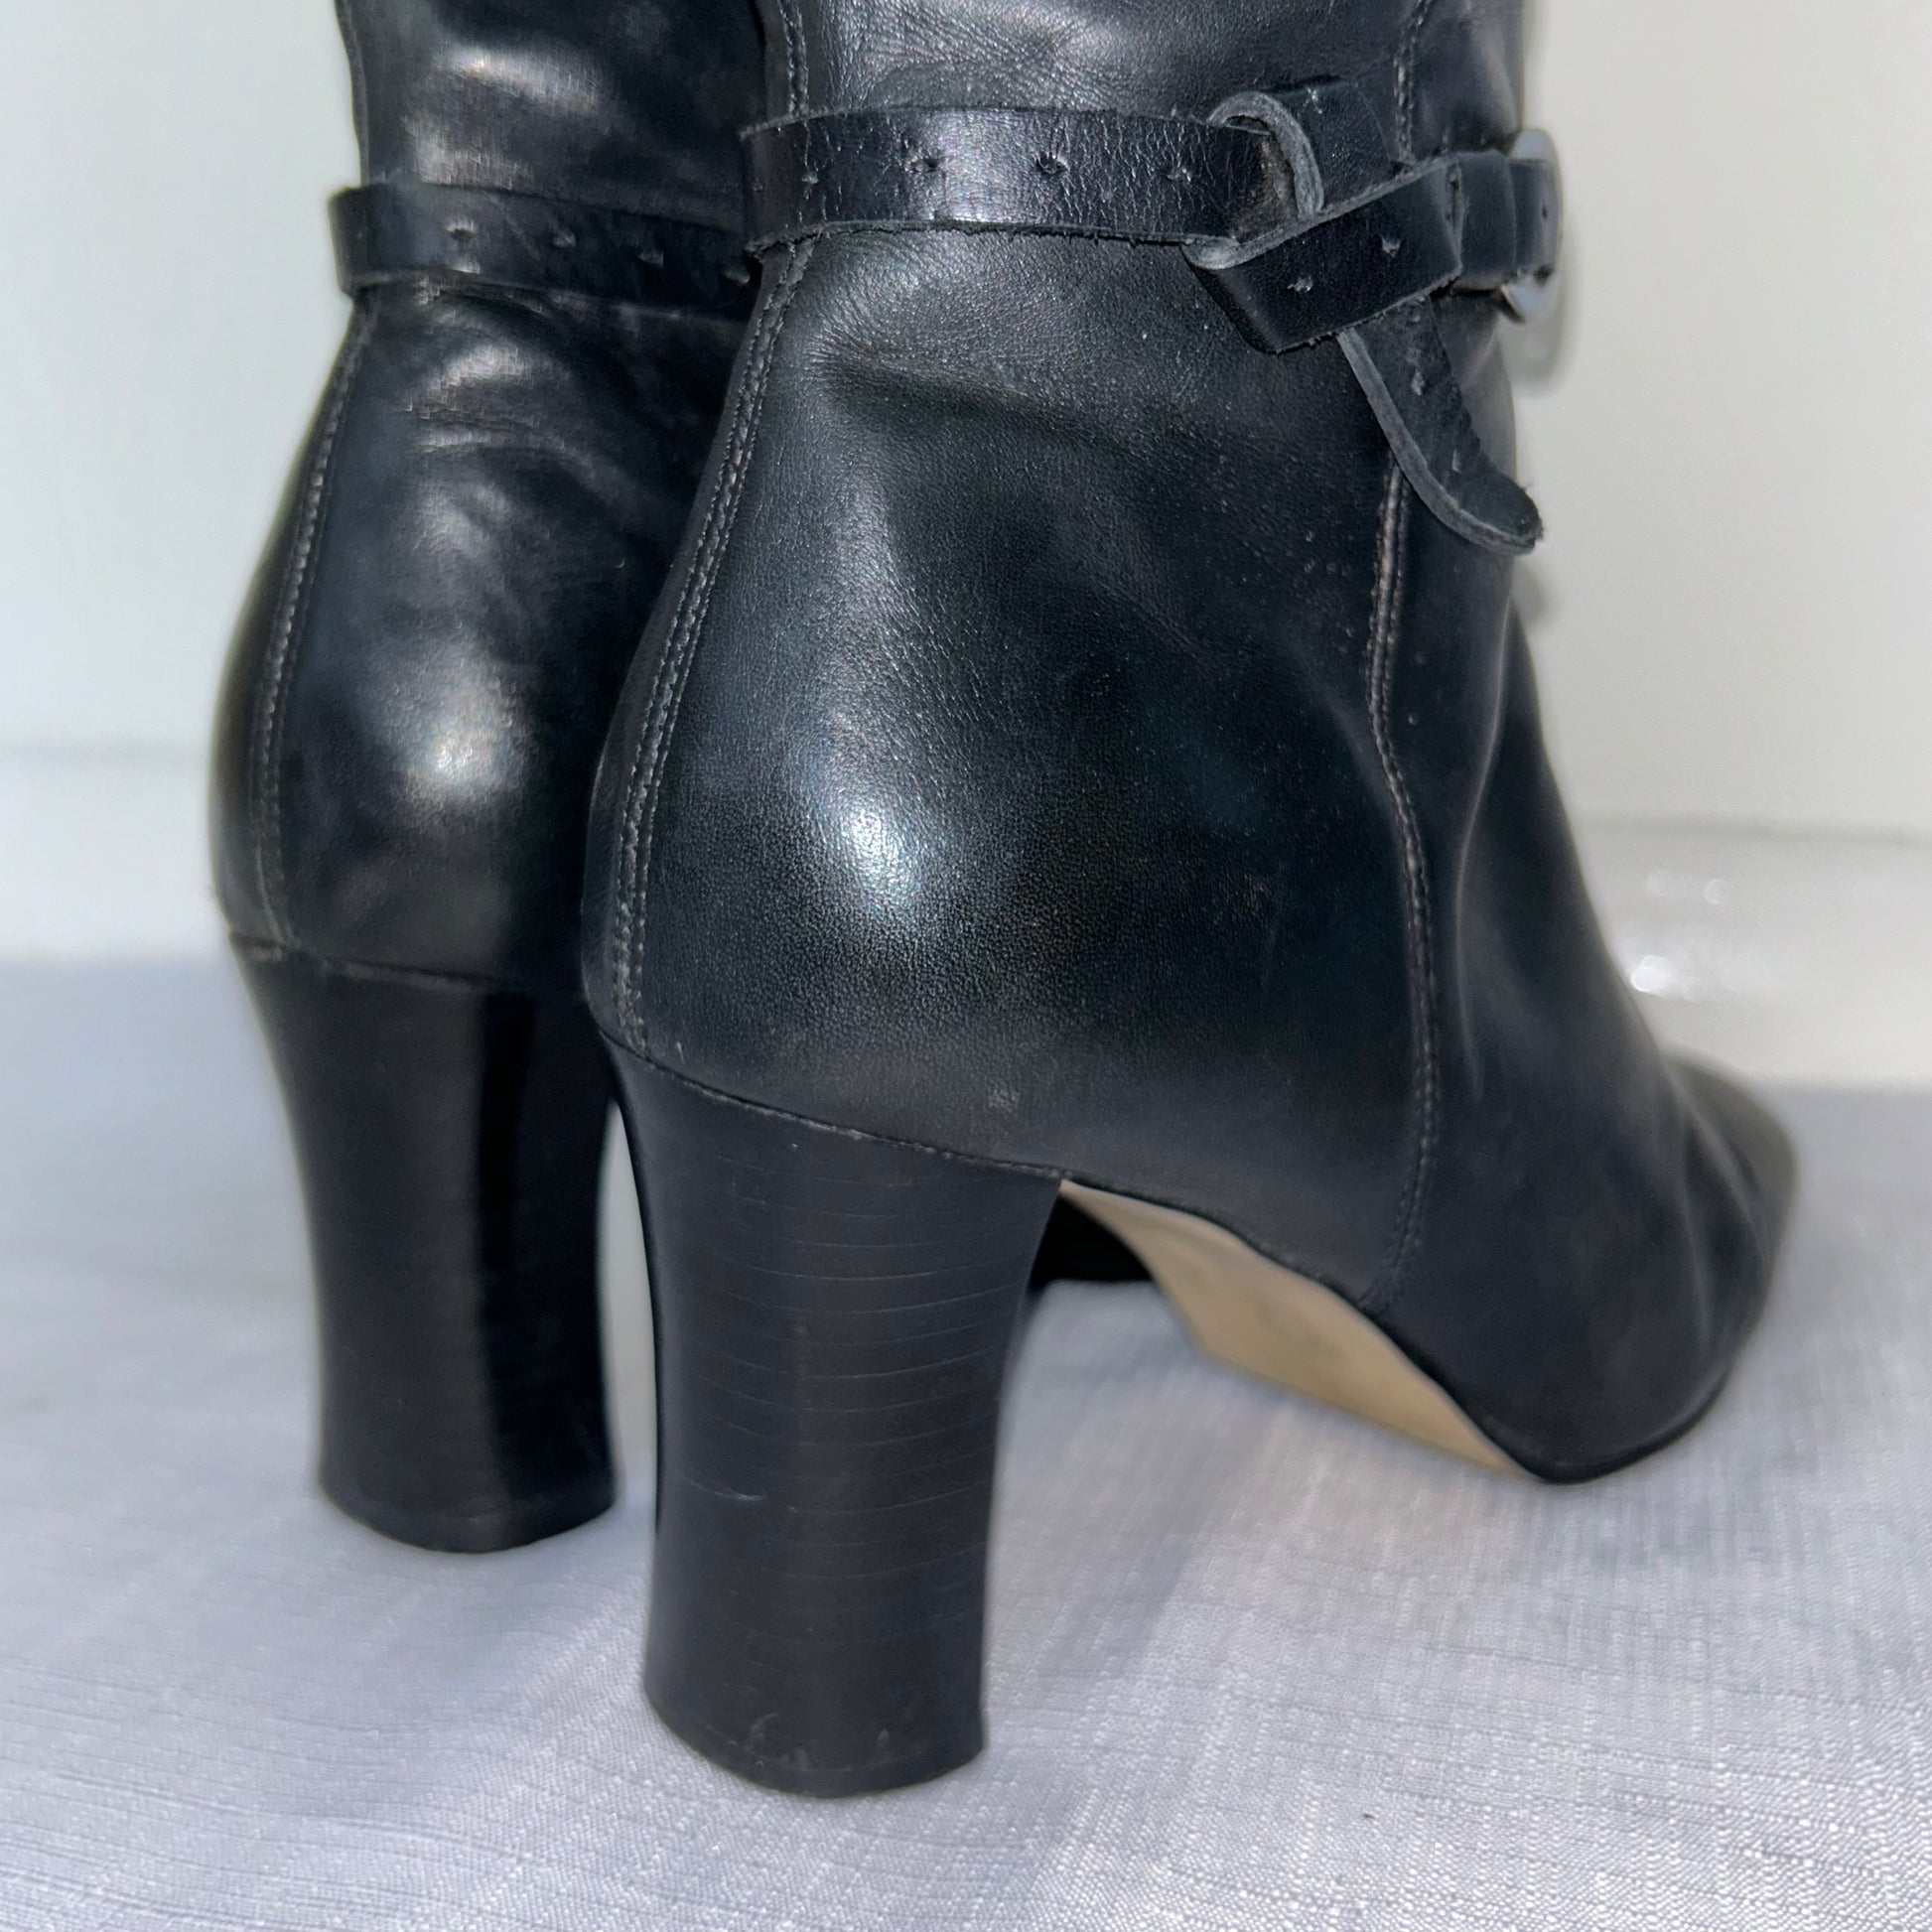 heels of black knee high leather buckle boots on a white background